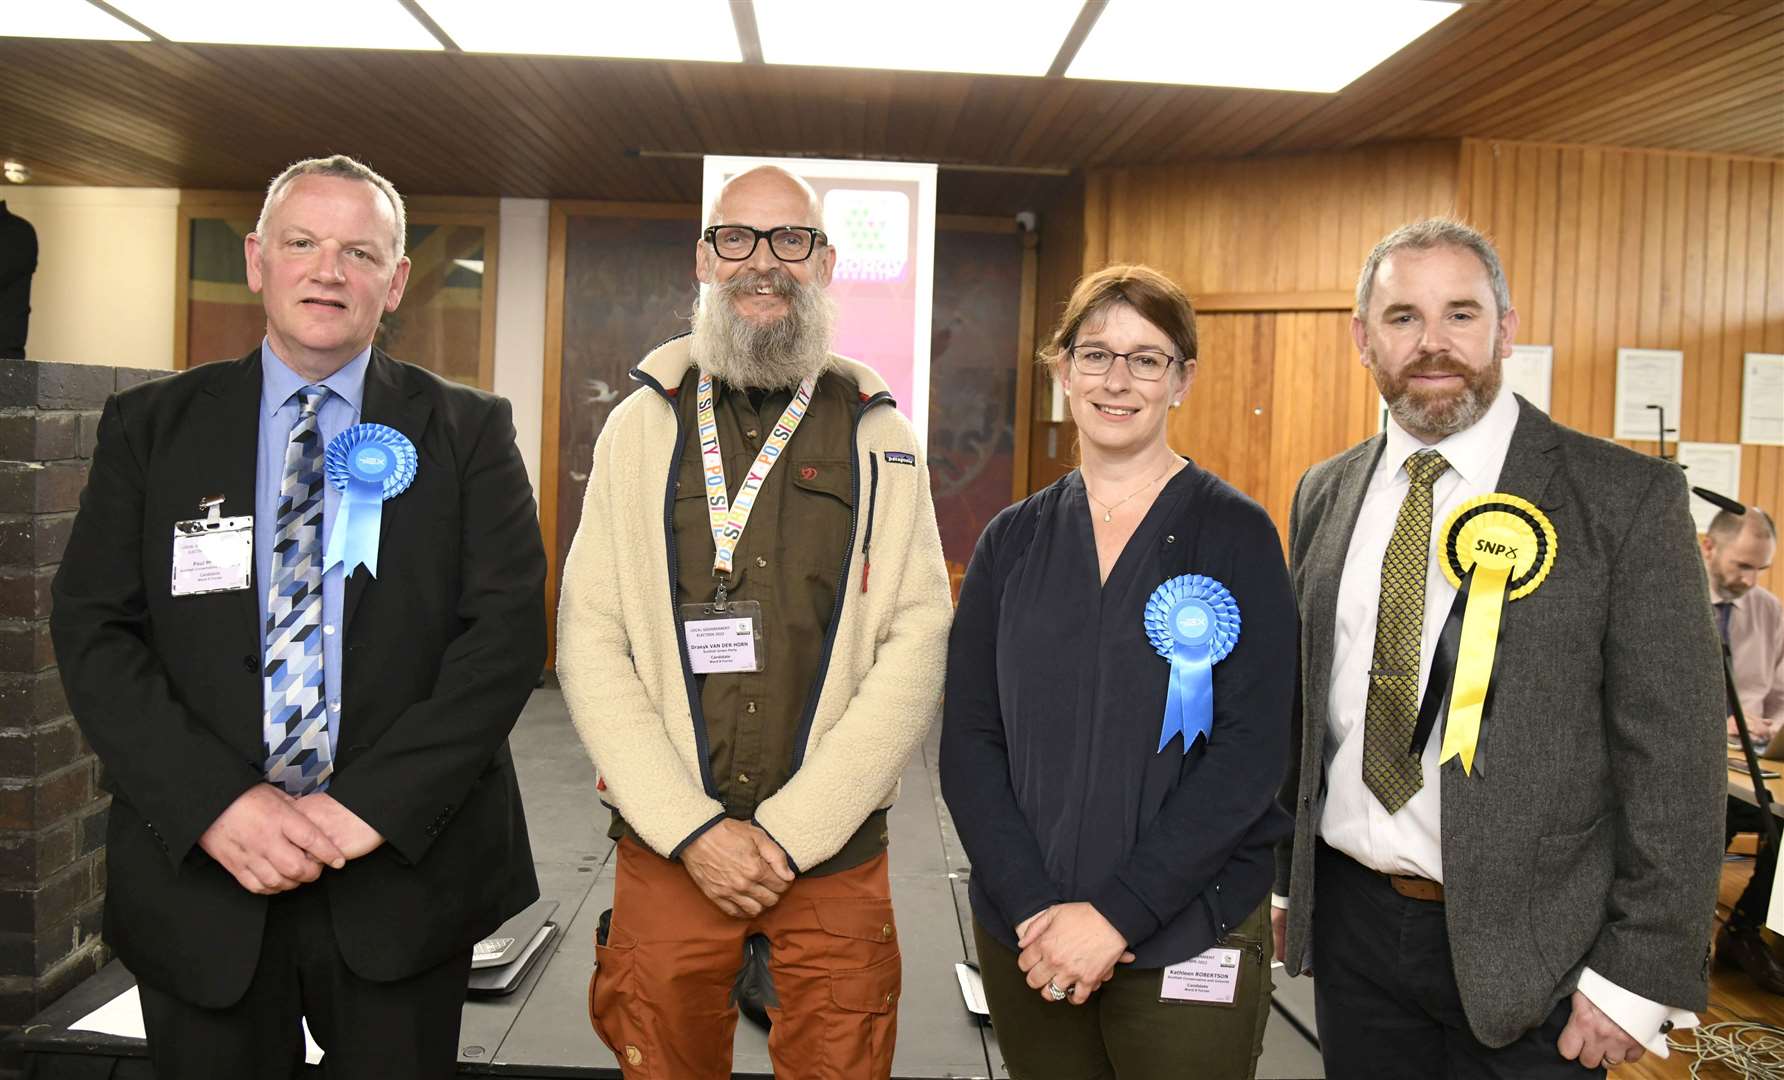 Forres Councillor Scott Lawrence (far right) has signed the open letter. He is pictured with Conservative members for Forres Paul McBain (left) and Kathleen Robertson, and Green Draeyk Van Der Horn, who is not one of the 13 councillors to threaten a vote of no confidence in Cllr Marc Macrae.